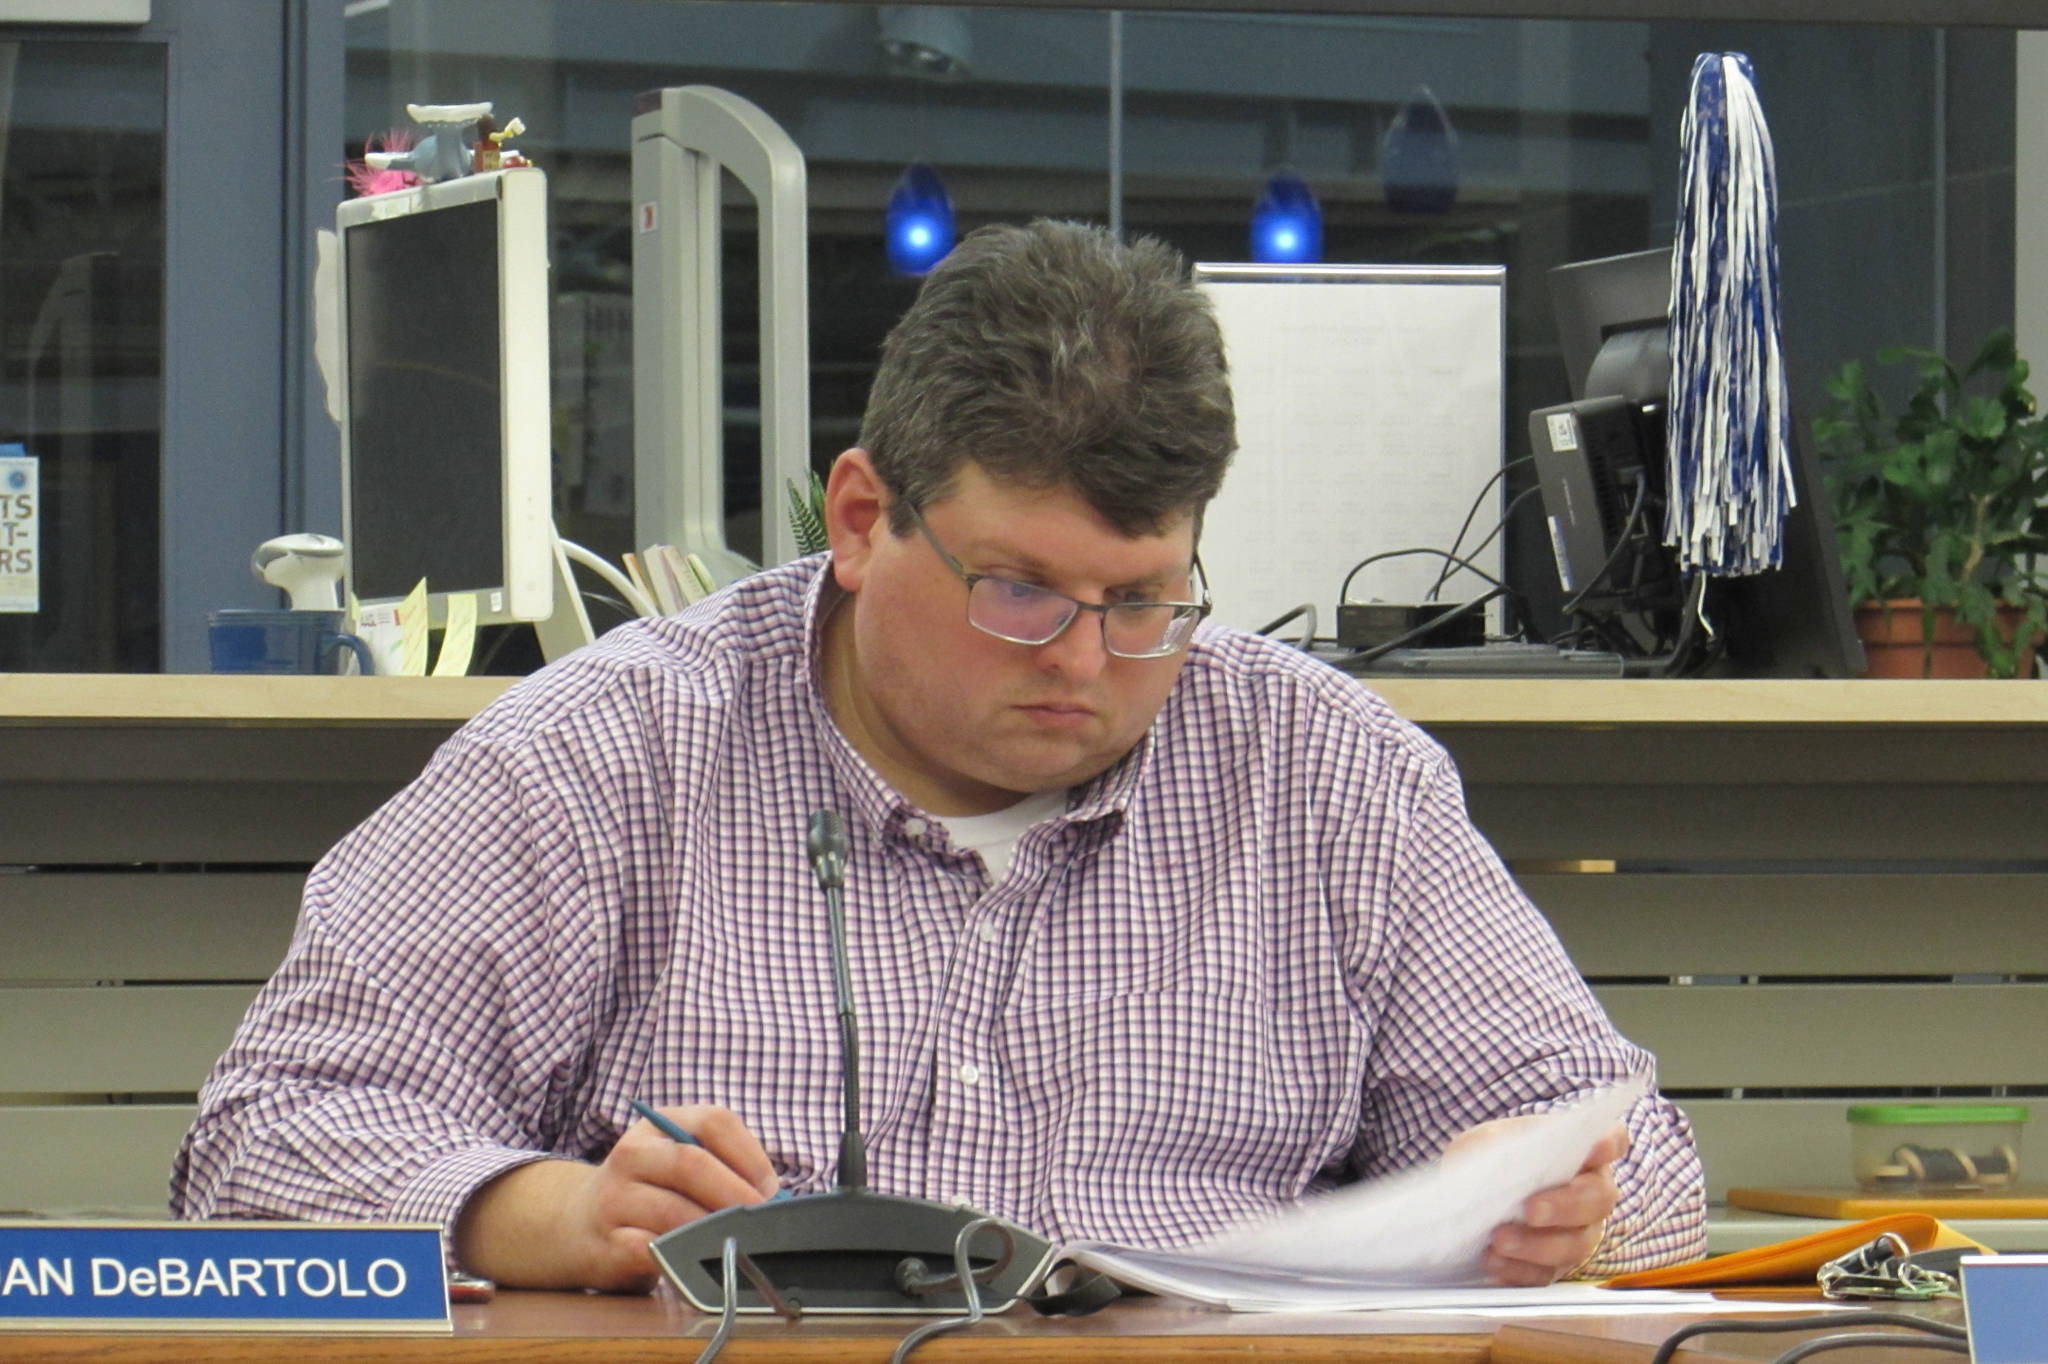 Juneau School District School Board Vice President Dan DeBartolo looks at his meeting packet during budget discussions Tuesday, March 12, 2019. (Ben Hohenstatt | Juneau Empire)